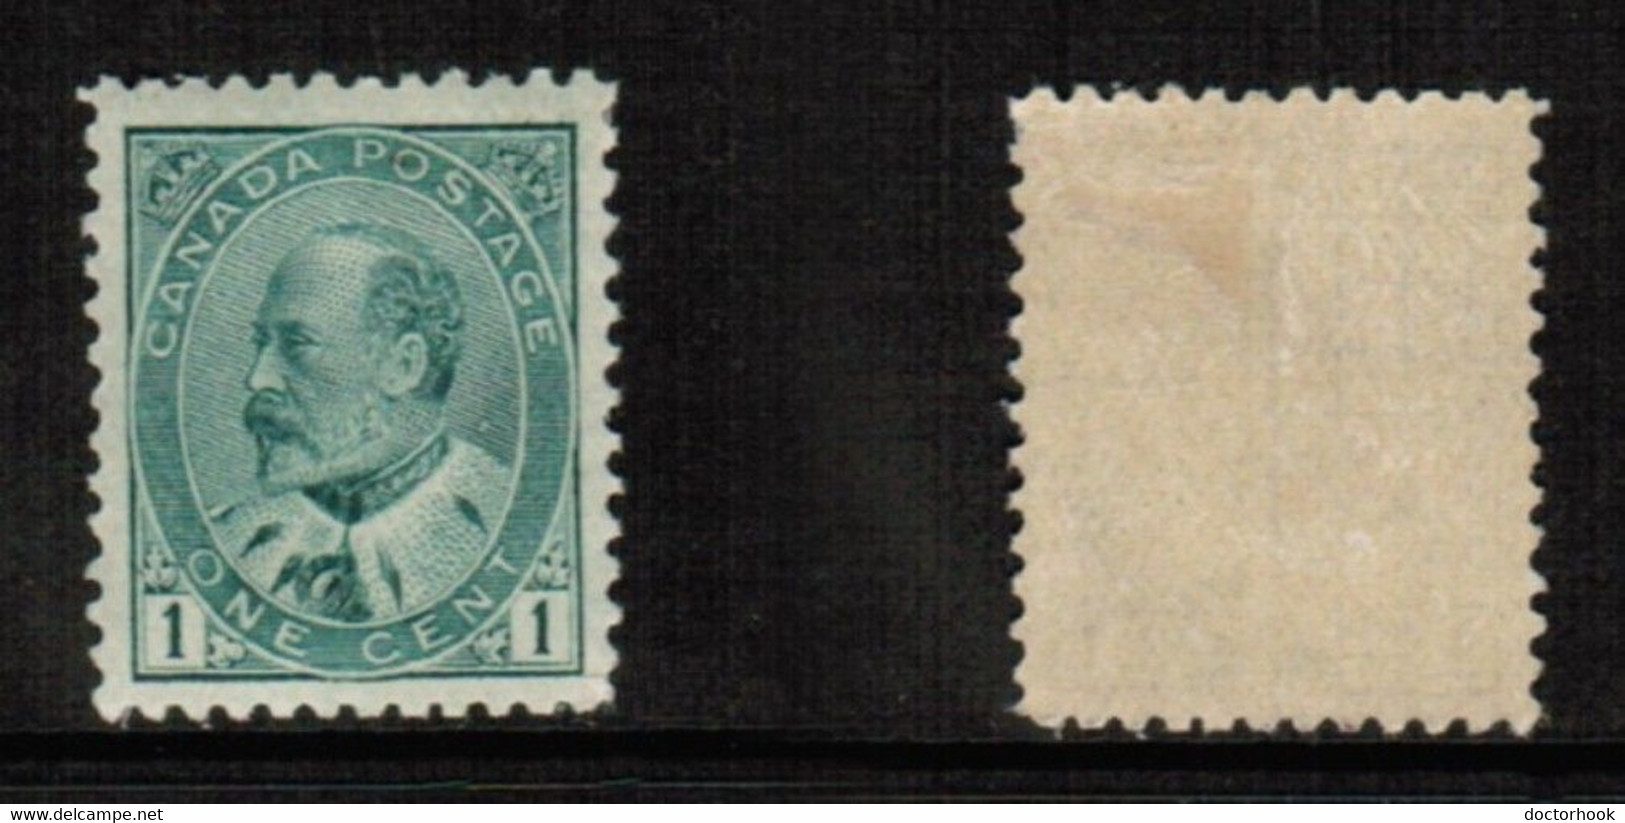 CANADA   Scott # 89* MINT HINGED (CONDITION AS PER SCAN) (CAN-M-1-8) - Unused Stamps